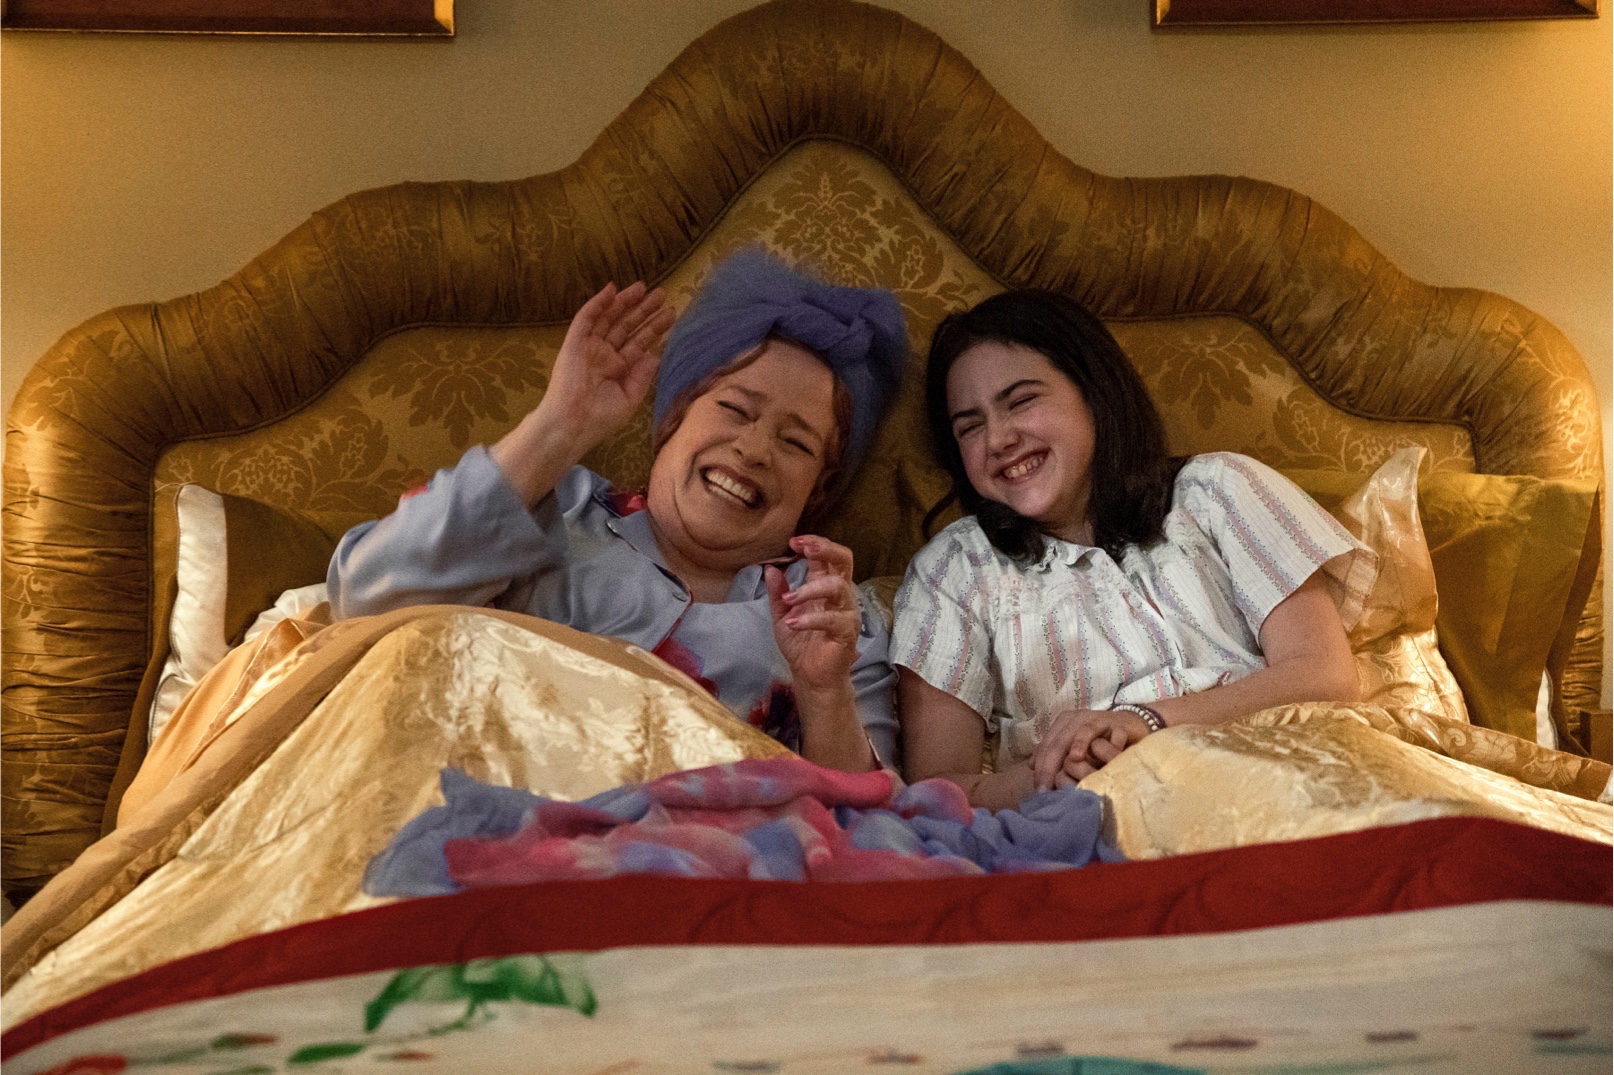 Kathy Bates and Abby Ryder Fortson in 'Are You There God? It's Me, Margaret' (Courtesy of Lionsgate)